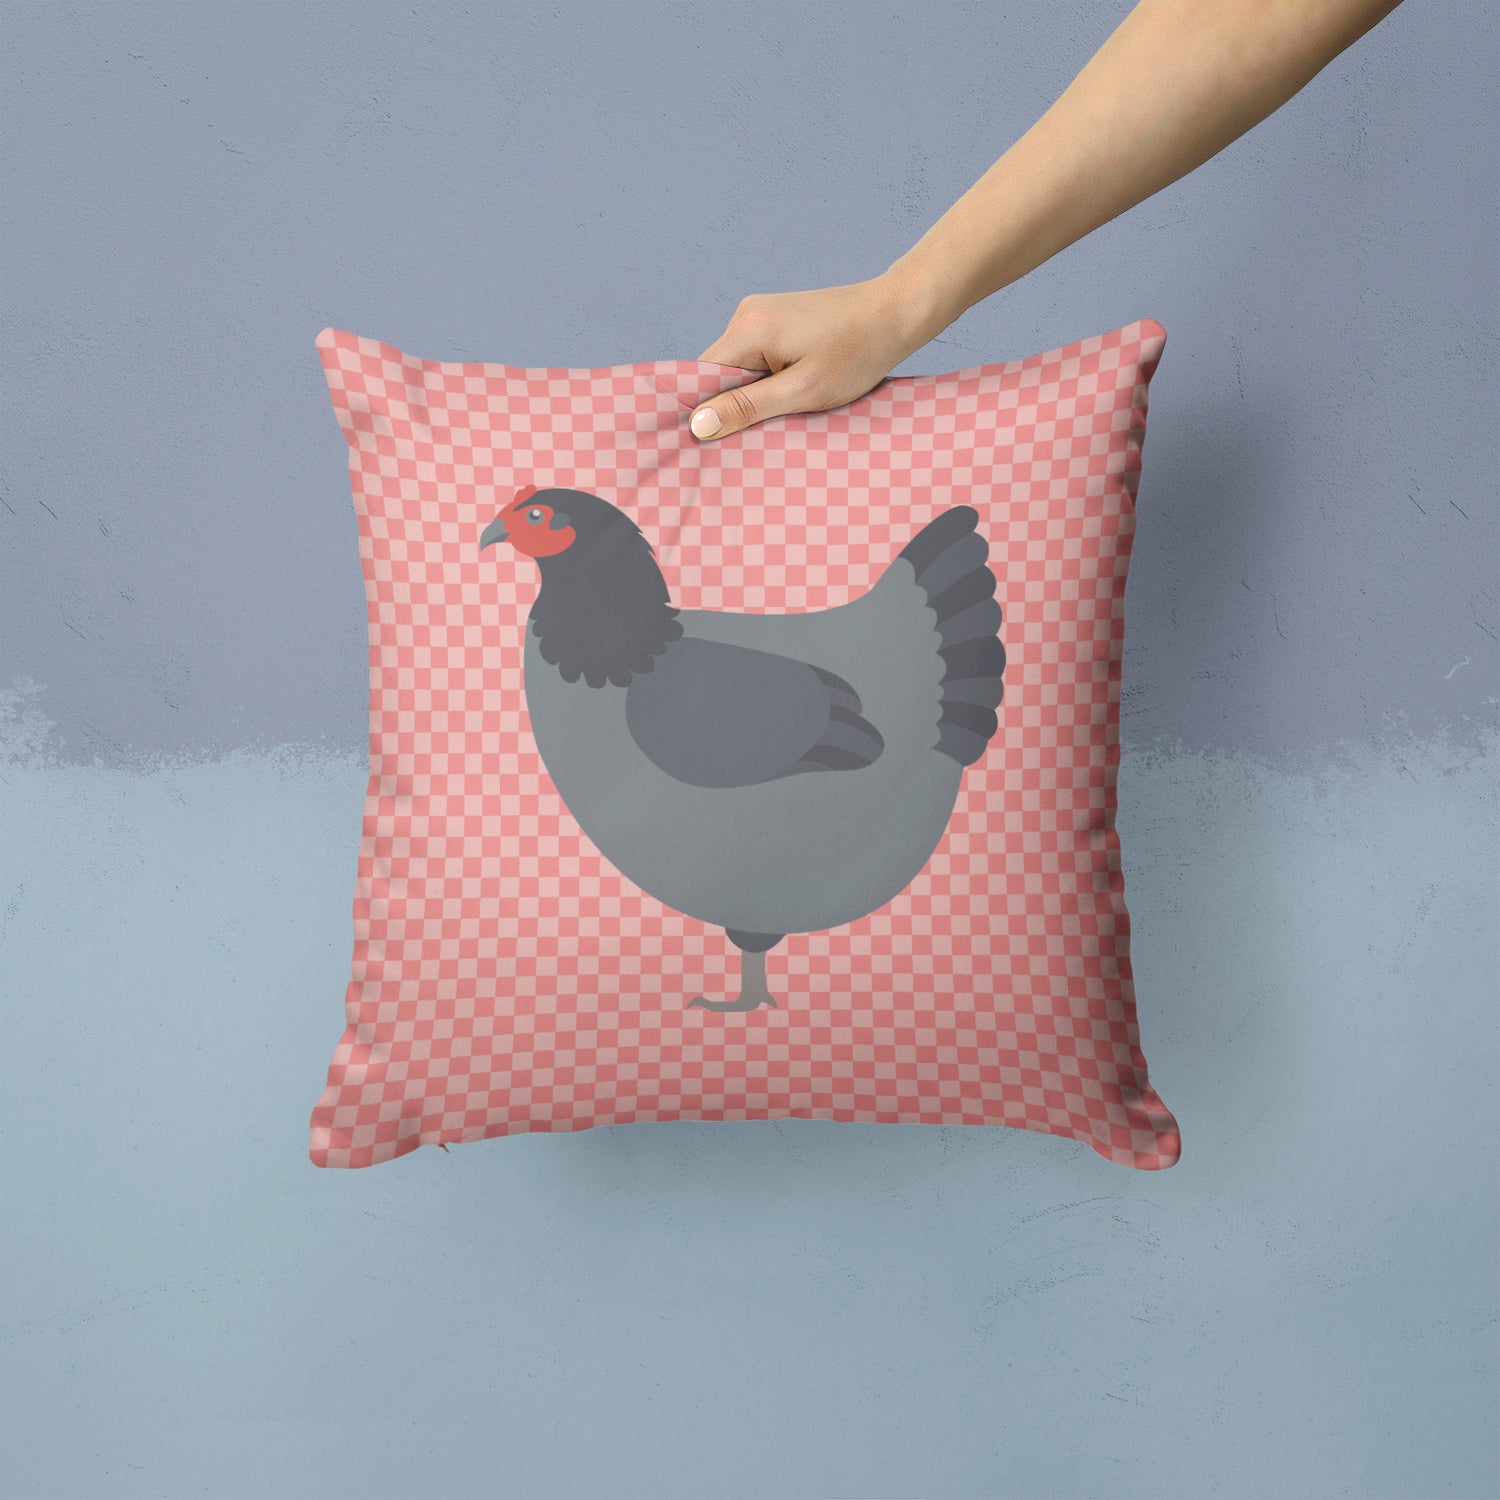 Jersey Giant Chicken Pink Check Fabric Decorative Pillow BB7835PW1414 - the-store.com